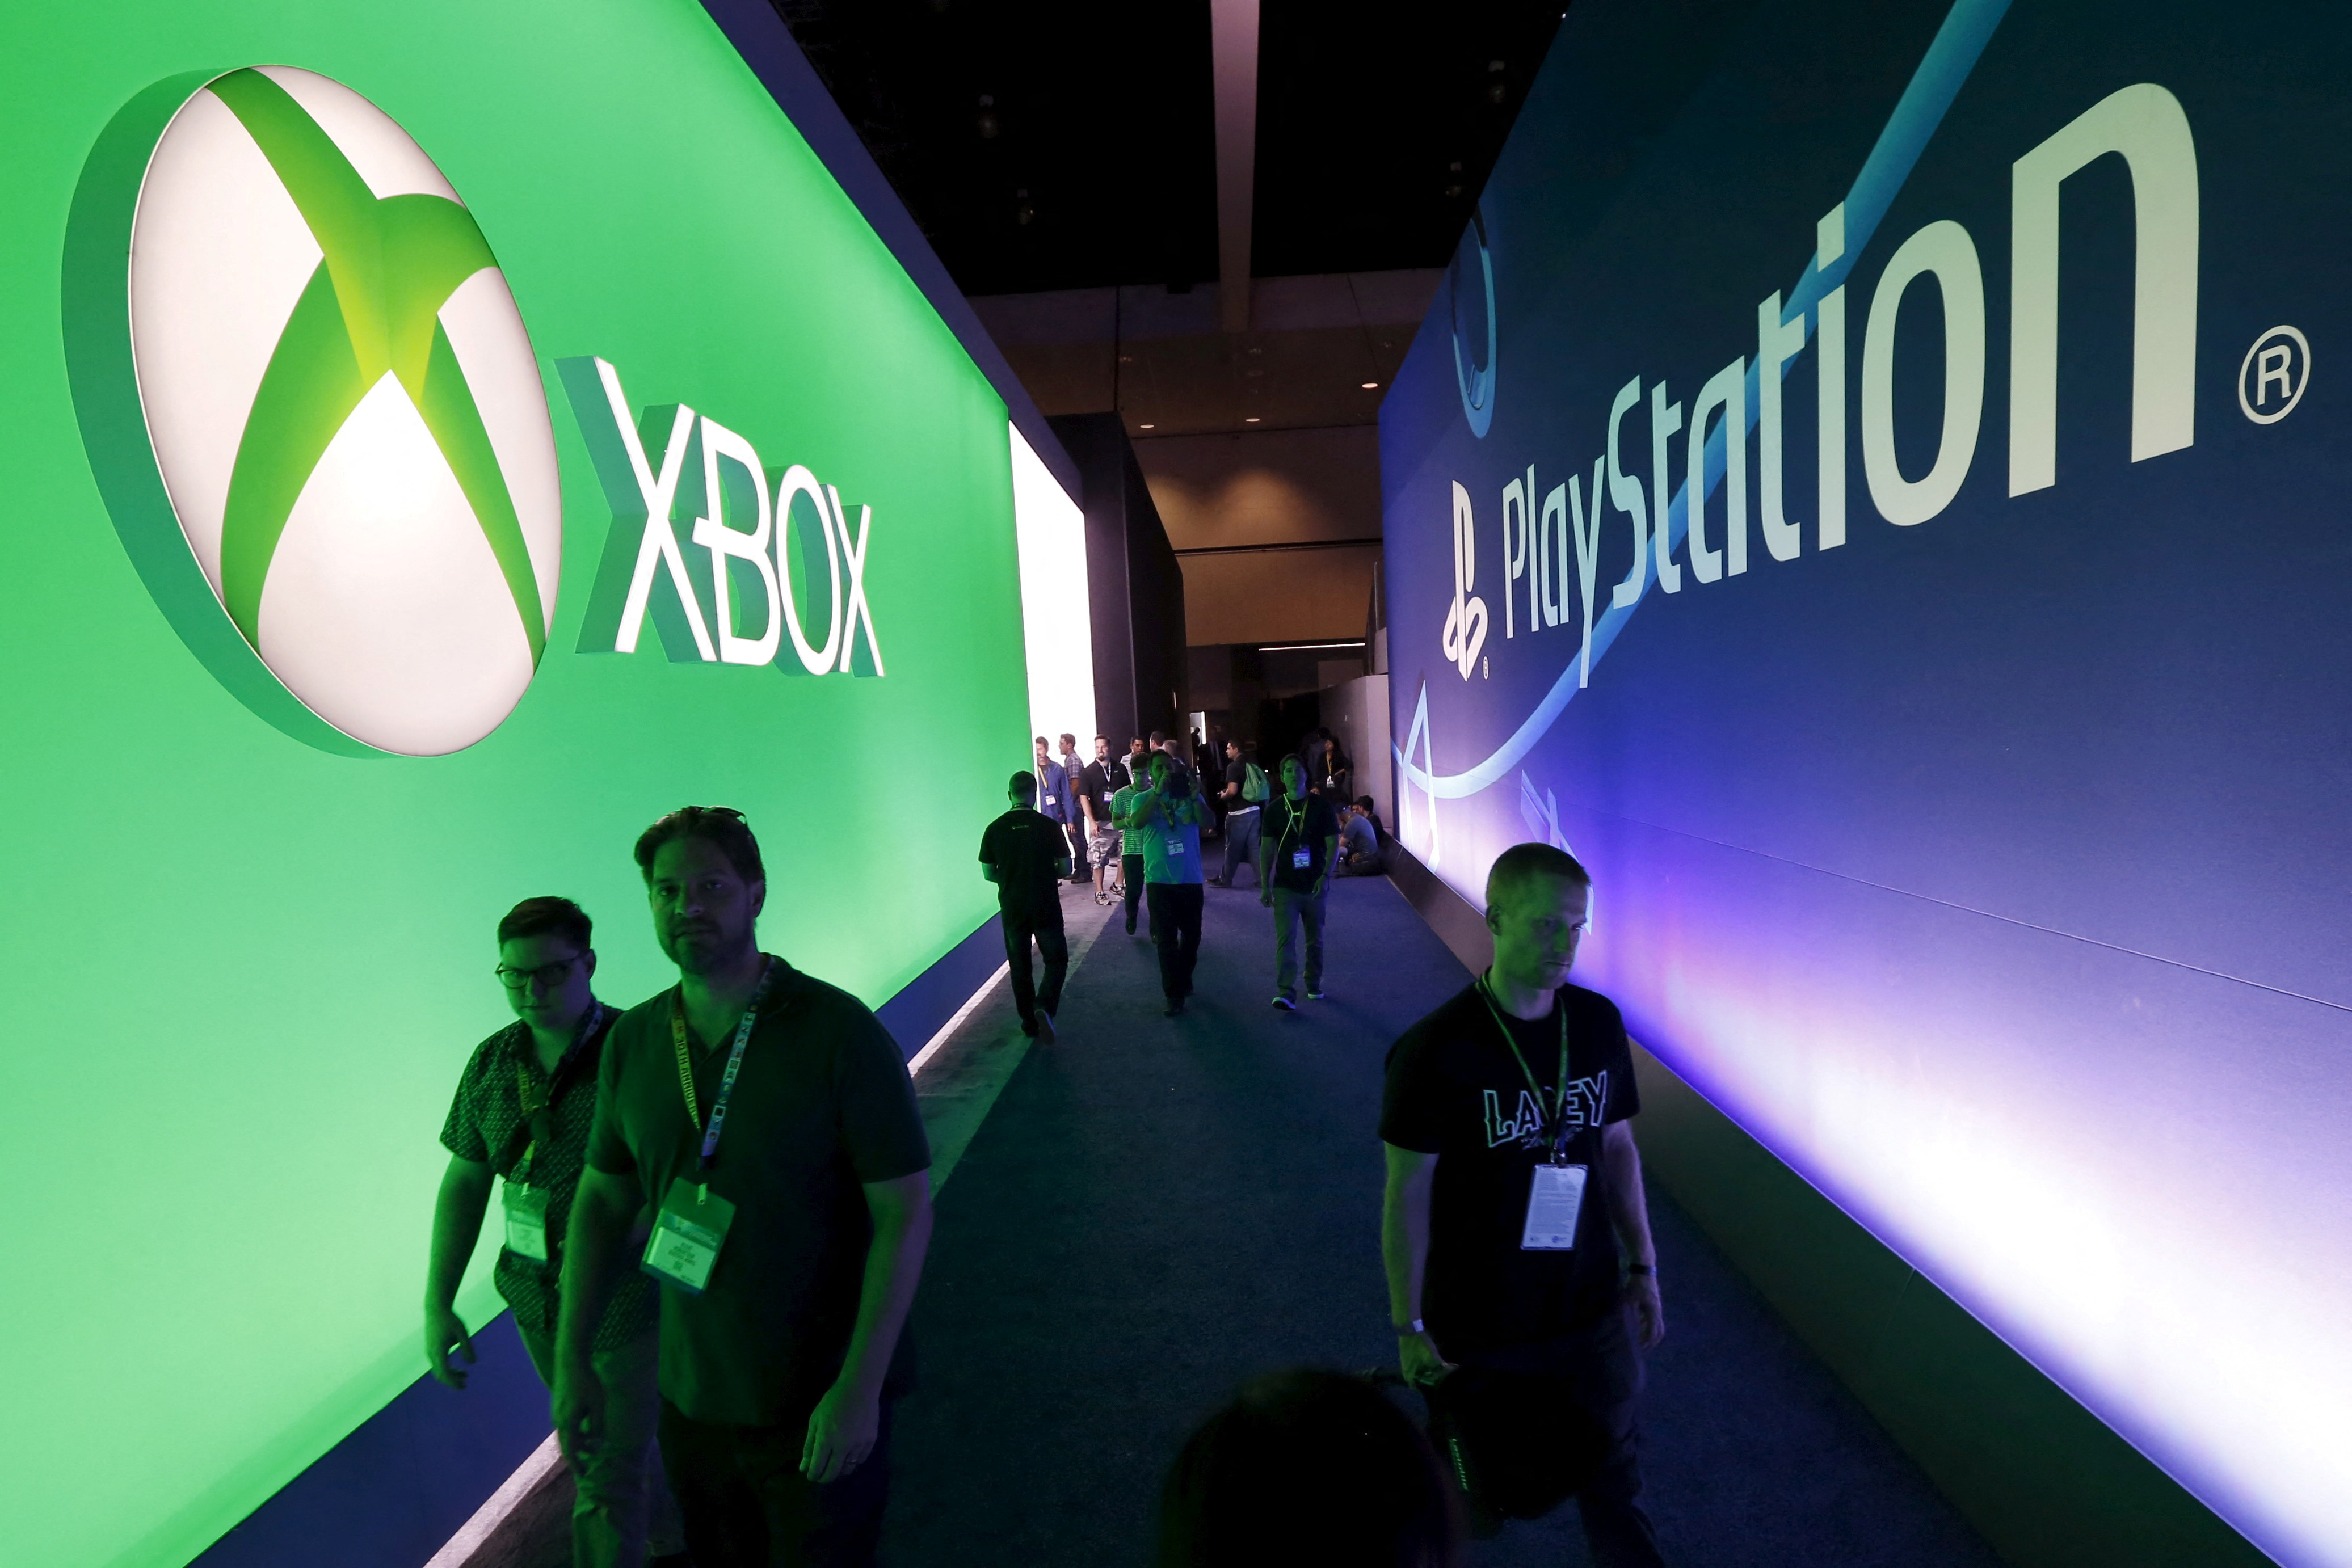 Attendees walk past a Microsoft Xbox sign opposite a Sony PlayStation sign at the Electronic Entertainment Expo, or E3, in Los Angeles